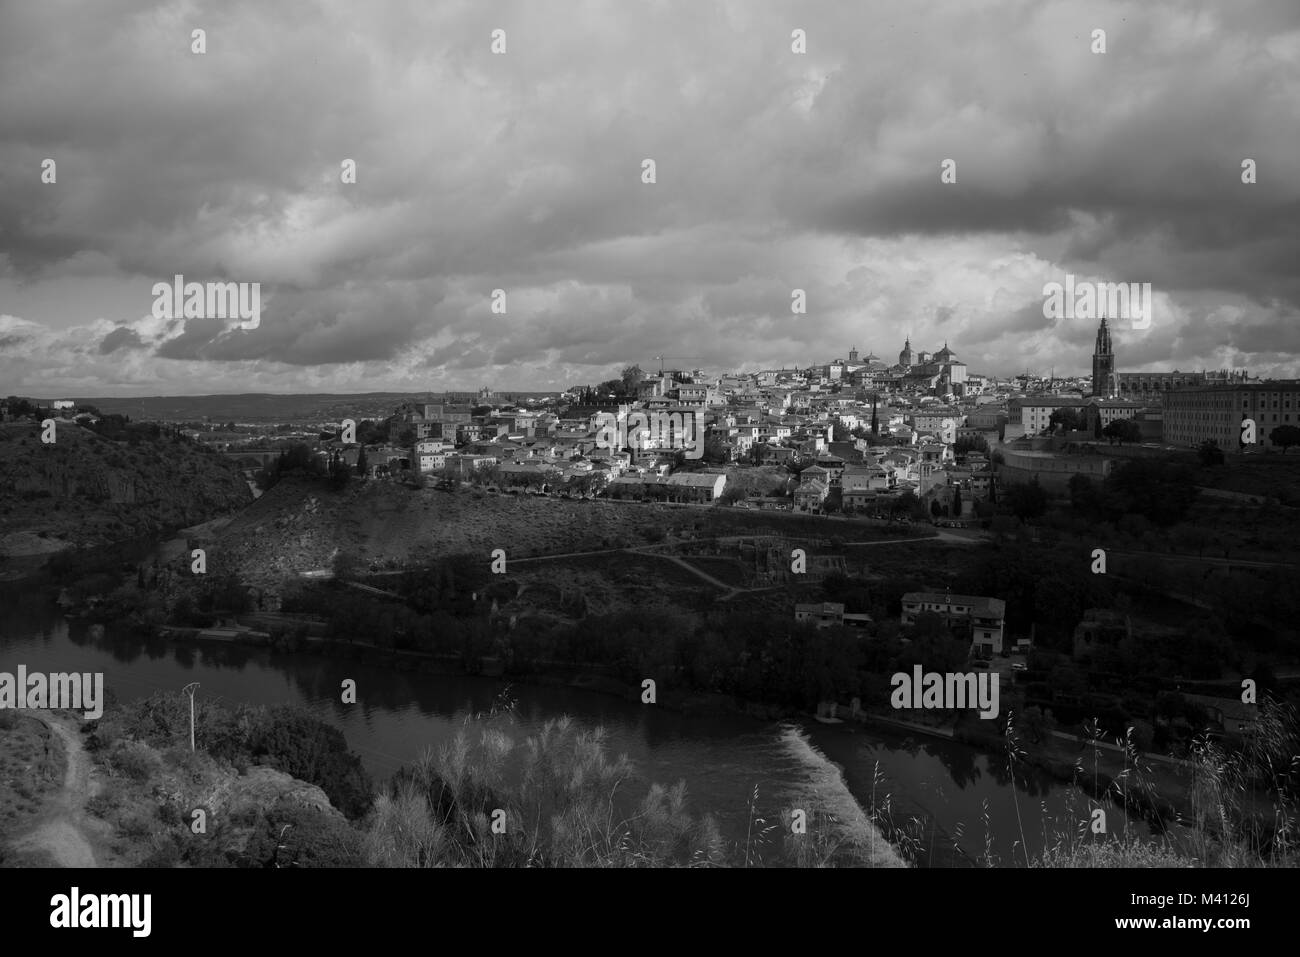 Panoramic view with dark clouds over former Spanich capital Toledo near Madrid in the Casilla - La Manch region Stock Photo